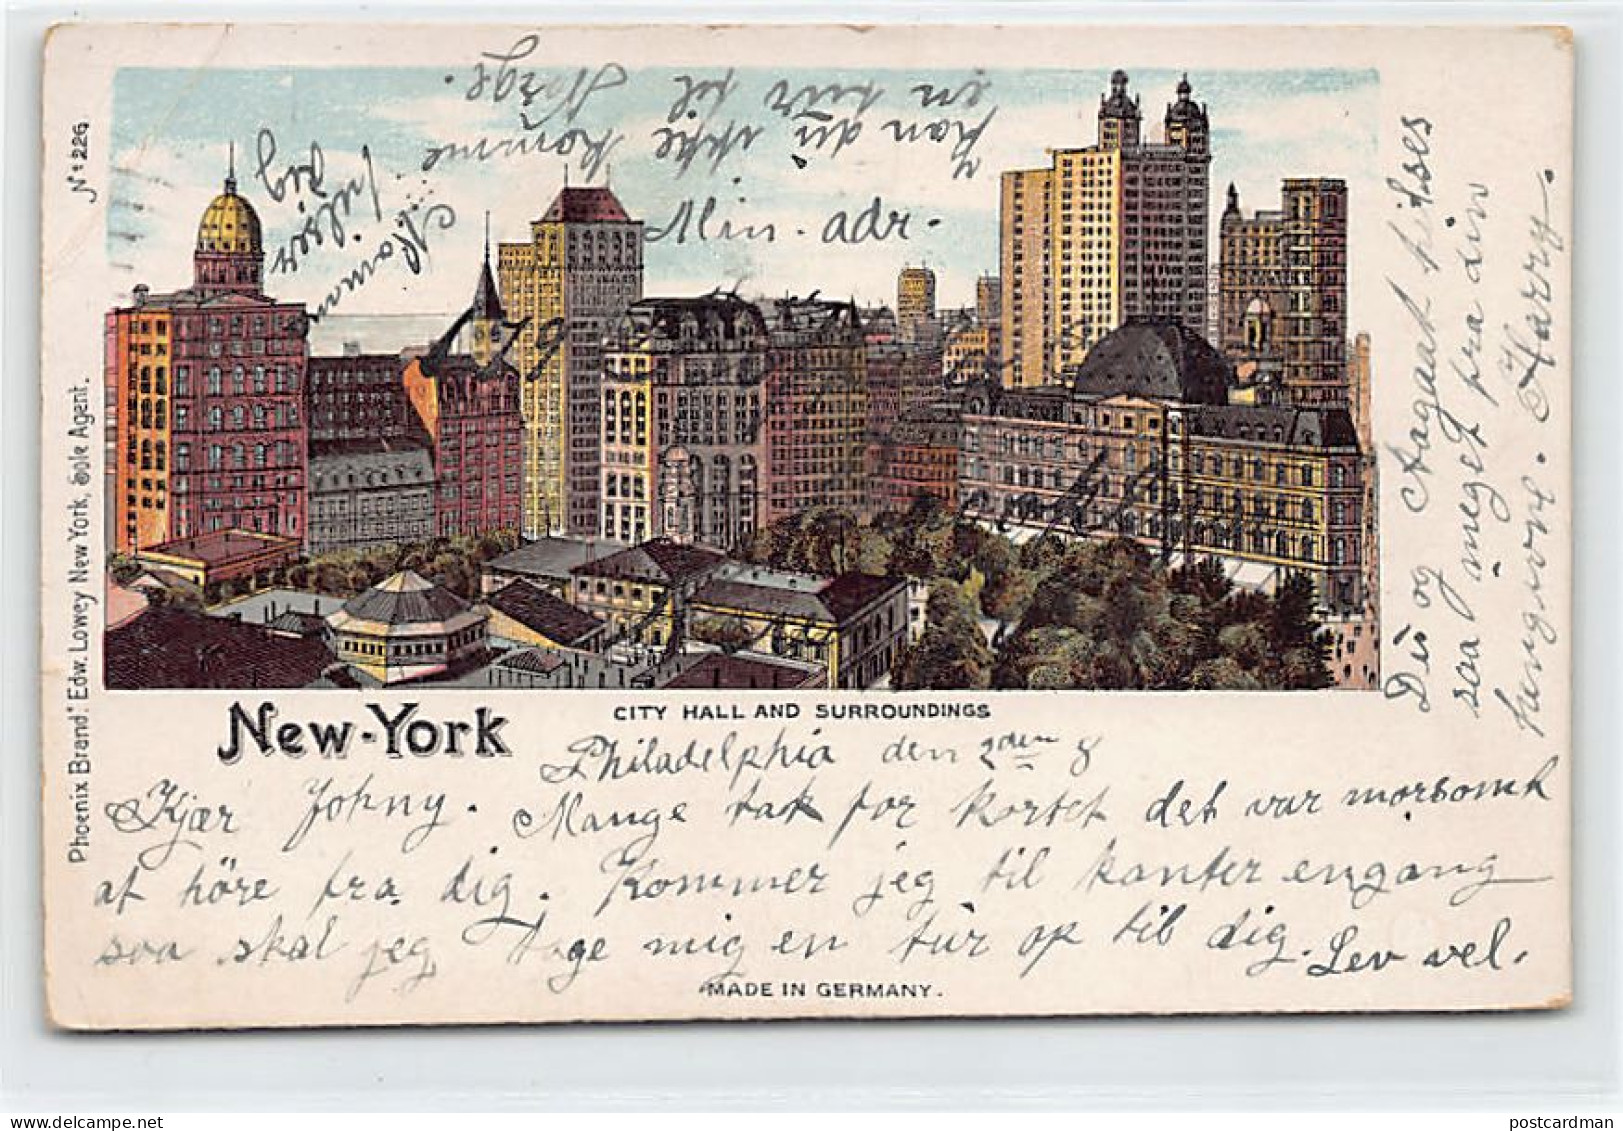 Usa - NEW YORK CITY - LITHO - City Hall And Surroundings - Publ. Edw. Lowey 226 - ONE CORNER FOLD - Native Americans